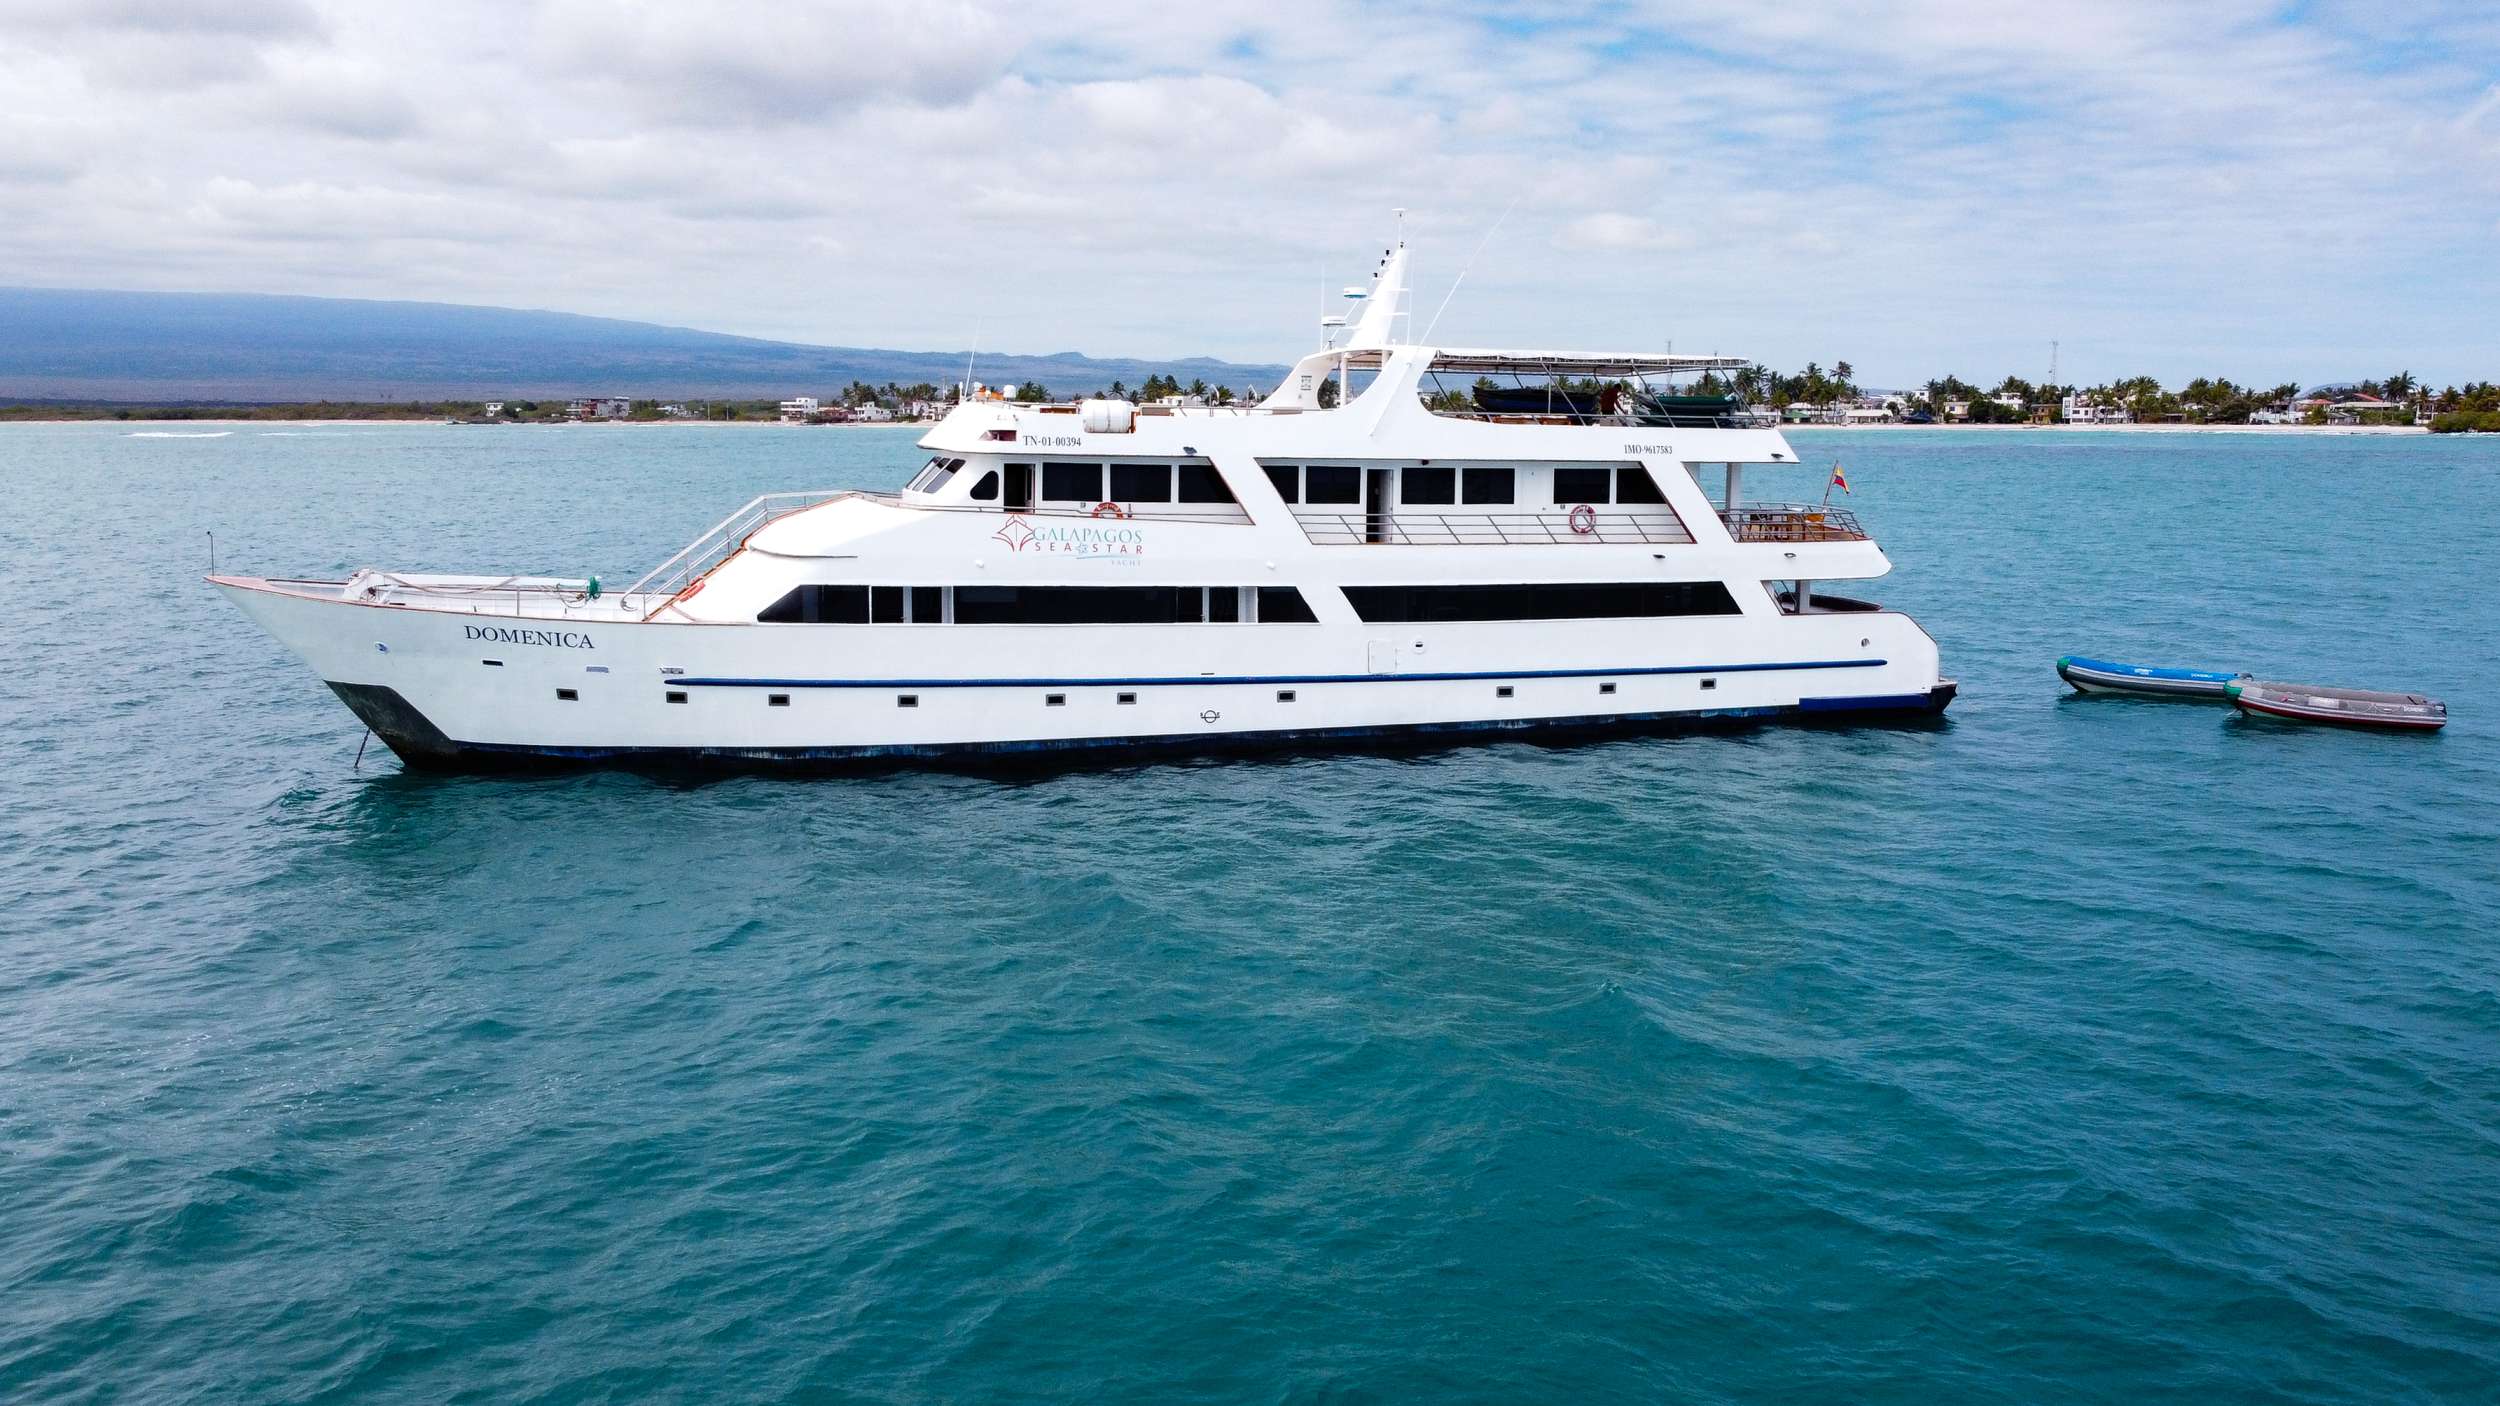 Our yacht combines excellence, privacy and comfort in the marvellous setting of the Galapagos Islands. The M/YGrand Odyssey has a capacity for 16 passengers, it features 8 spacious Galapagos &amp; matrimonial suites (25maprox) and 1 Odyssey suite (35m 2 approx) equipped with panoramic windows to enjoy the wonderful landscapes ofthe islands, private bathroom, hot/cold water, airconditioning with independent controls, minibar and TV. Twin bedsor one faux king bed and connected suites for families.Local and International dishes especially designed by our chef, will be served in the cosy atmosphere of our dining room. Our yacht offers a large solariumwith shaded and uncovered areas, two Jacuzzis and comfortable sun loungers.  Social areas include saloon, mini library and video library and a play zone for kids (during family departures). Snorkeling equipment andkayaks will be available without any extra charge. The Galapagos Grand Odyssey offers avid travellers the opportunity to experience close encounters with the unique wildlife of the Galapagos Islands. We invite you to join us on board our Exclusive First Class yacht and admire the wonders of evolution as you enjoy all the creature comforts of home topped off with world class service. The best way for a traveller to make the most of their Galapagos vacation time is to cruise around the Islands and experience several visitor sites each day. We offer one of the best planned itineraries on board the best built liveaboard yacht. Our shore excursions have been crafted with care and allow passengers to see up close the Galapagos animals and how they have adapted to the harsh island conditions. On your Galapagos vacation we also make sure that survival of the fittest is observed and not experienced... this is why we designed the M/Y Galapagos Grand Odyssey, a exclusive first class yacht that represents a true evolution in the private yacht cruise industry. At Galapagos Grand Odyssey we put in over 100 years of combined experience in the design of our premium yacht M/Y Galapagos Grand Odyssey. You will not find a private yacht in the Galapagos Islands that offers more space, comfort or service on a 16 passenger boat. Amenities on board include a jacuzzi, al fresco dining area, spacious sun and shade decks, combined with elegant interiors and a cabin layout that allows for picture windows that can be opened for fresh air flow. A great Galapagos vacation itinerary that includes the main wildlife highlights what the Galapagos Islands have to offer. A variety of visitor sites including volcano hikes, Island trails, mangrove forests, turtle breeding farms, research centers, marine sites and more. A cruise on board the M/Y Galapagos Grand Odyssey will allow visitors to explore the both land animals and marine fauna of the Galapagos archipelago. Activities you can enjoy are trekking, horseback riding, snorkeling, scuba diving, beachcombing amongst others.